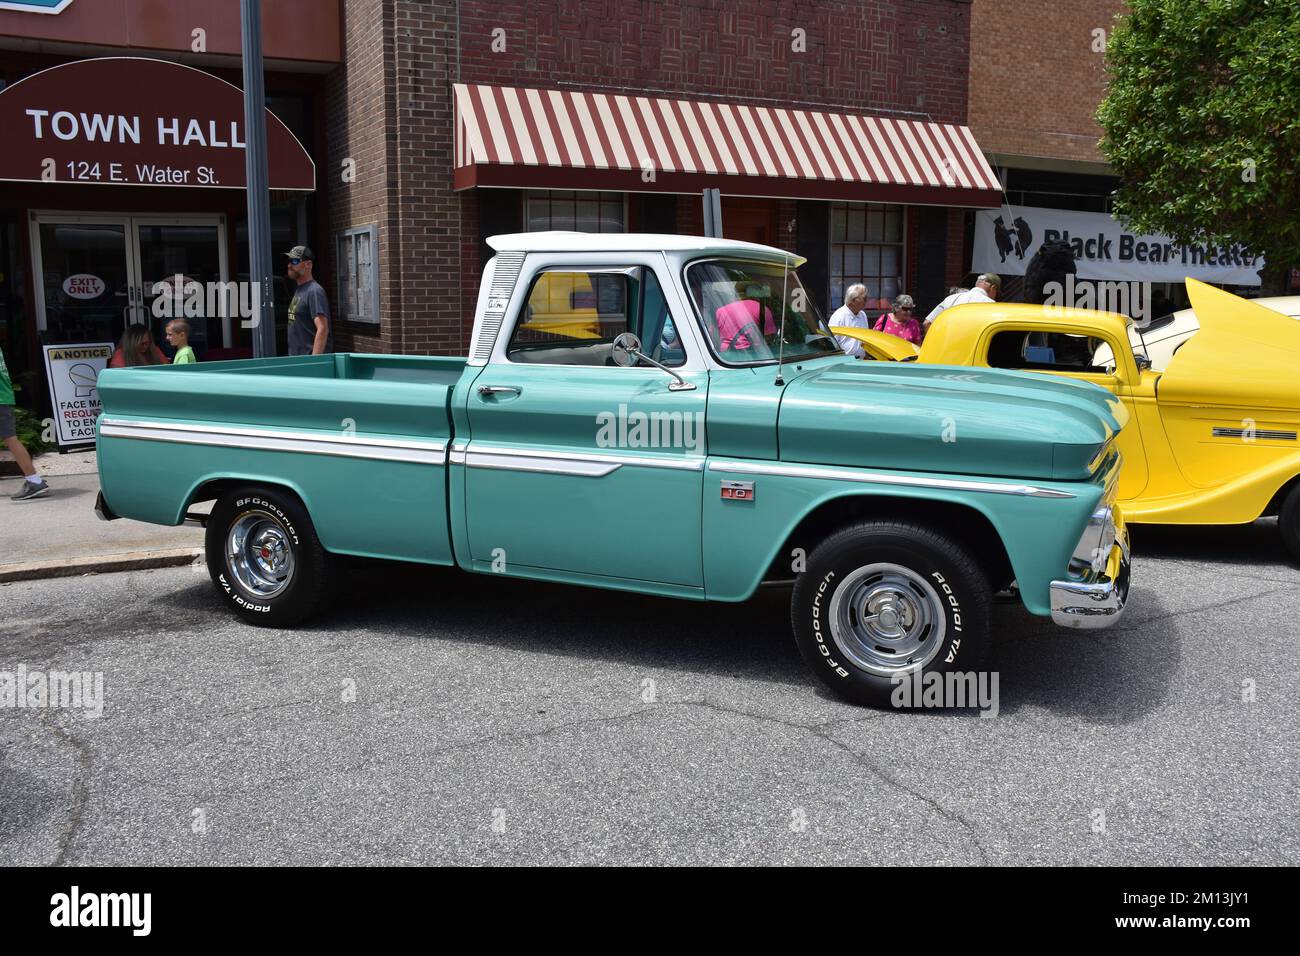 A 1966 C-10 Chevrolet Pickup Truck on display at a Car Show. Stock Photo